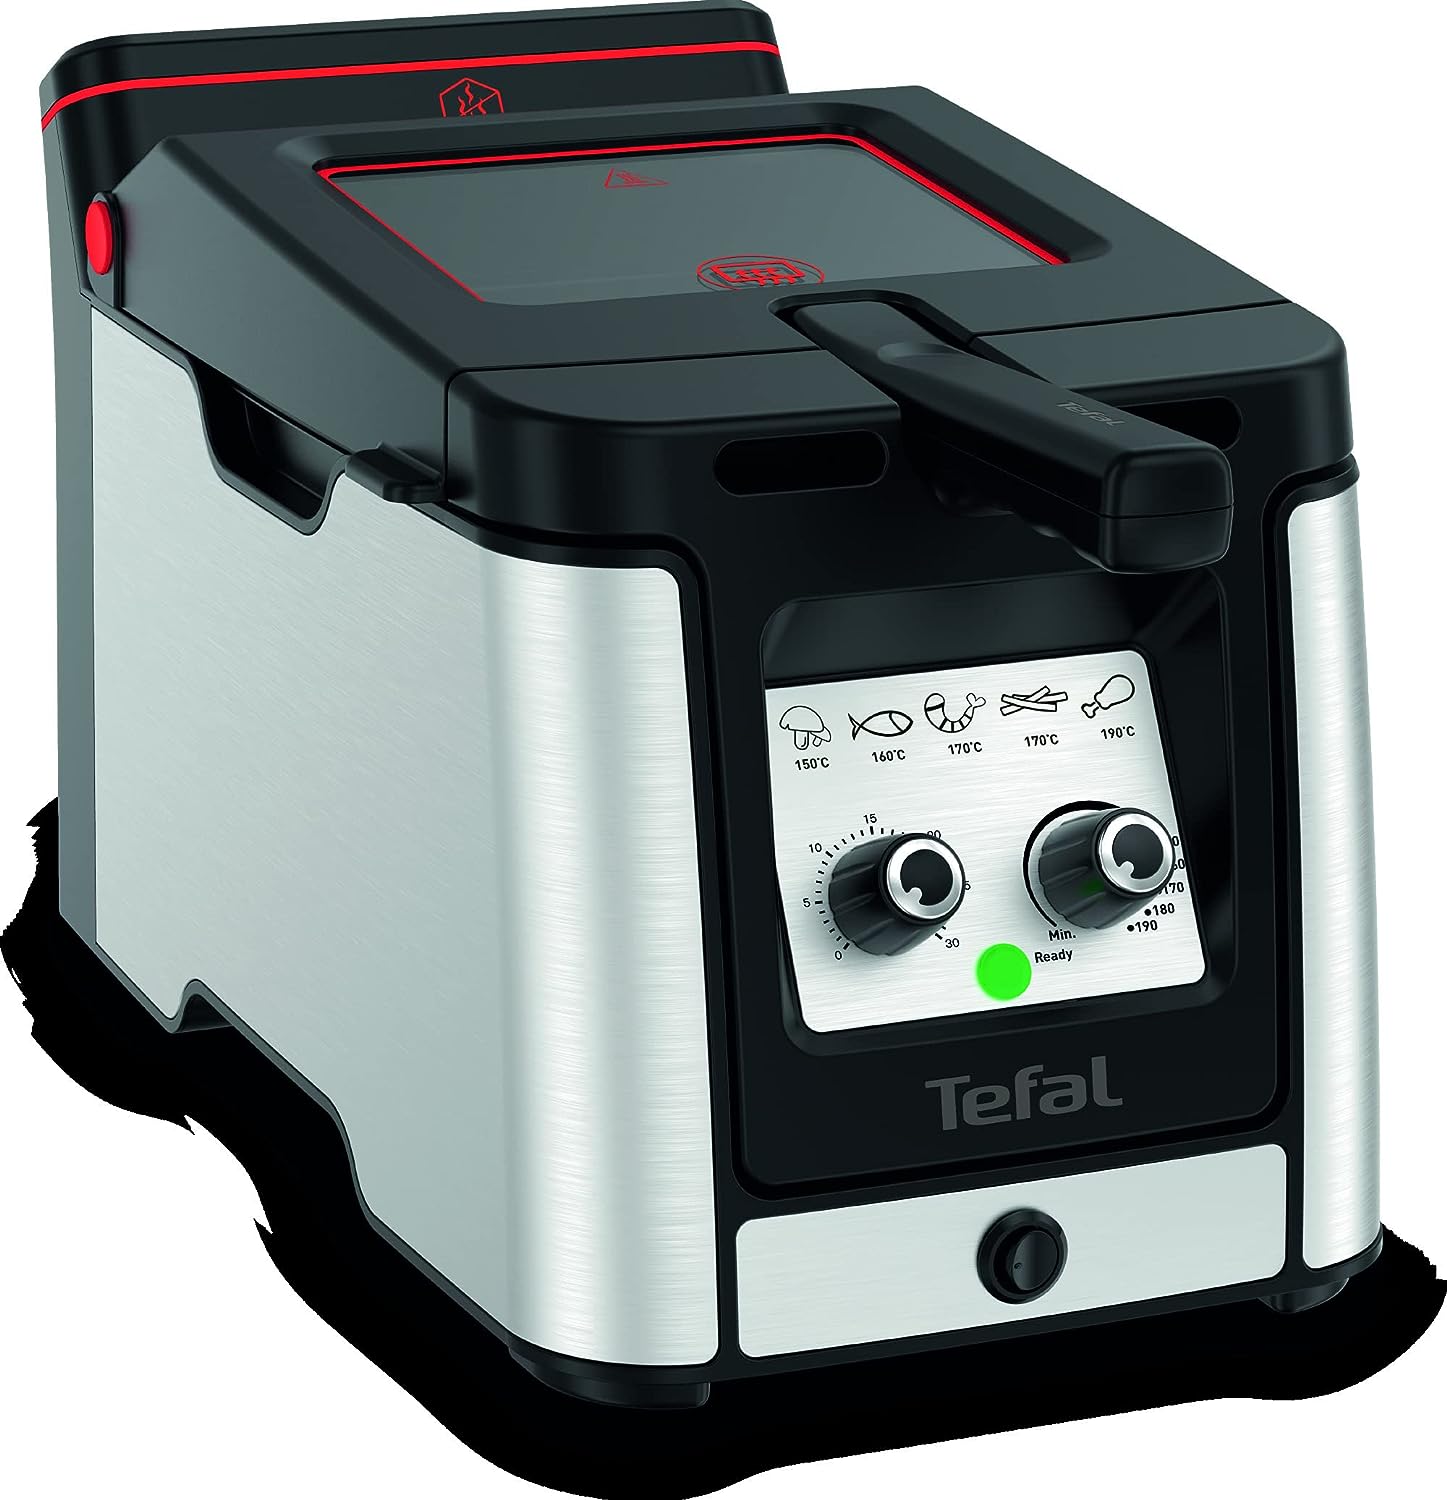 Tefal FR600D Clear Duo Fryer, Fry with Less Smoke and Odours, Capacity 1.2 kg, Thermostat, Timer, Large Viewing Window without Fogging, Dishwasher Safe, Black/Stainless Steel